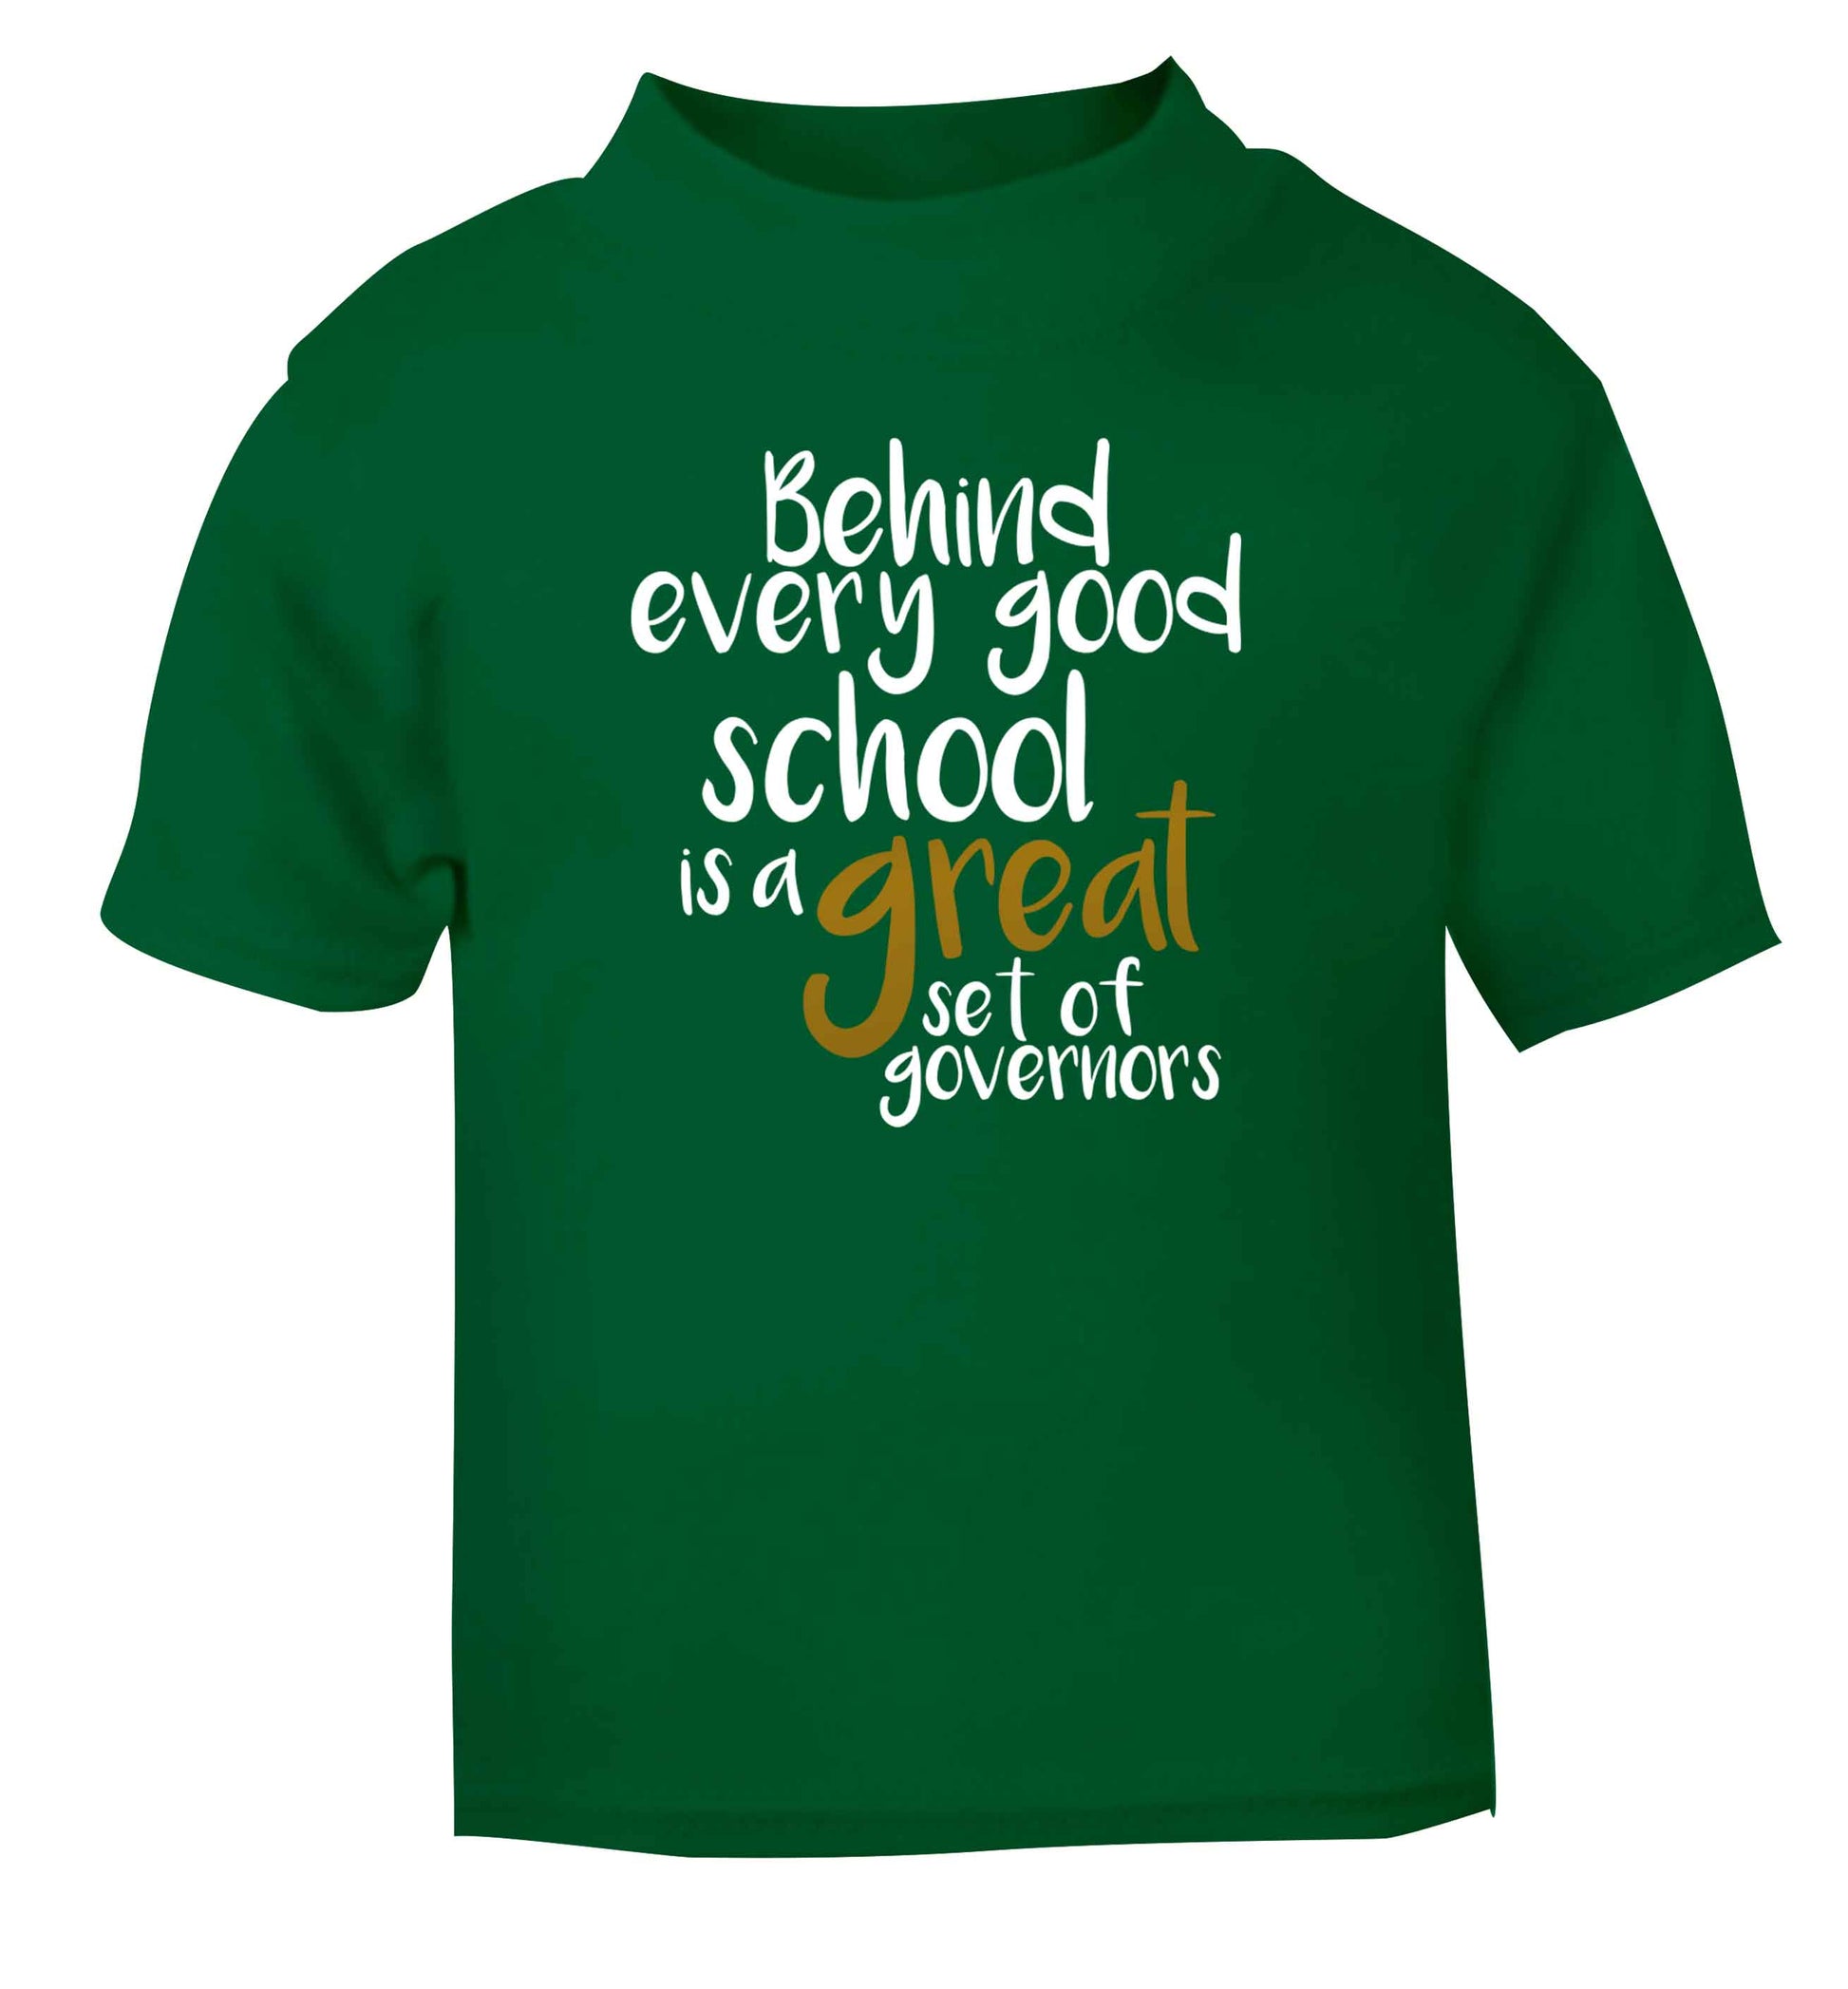 Behind every good school is a great set of governors green Baby Toddler Tshirt 2 Years